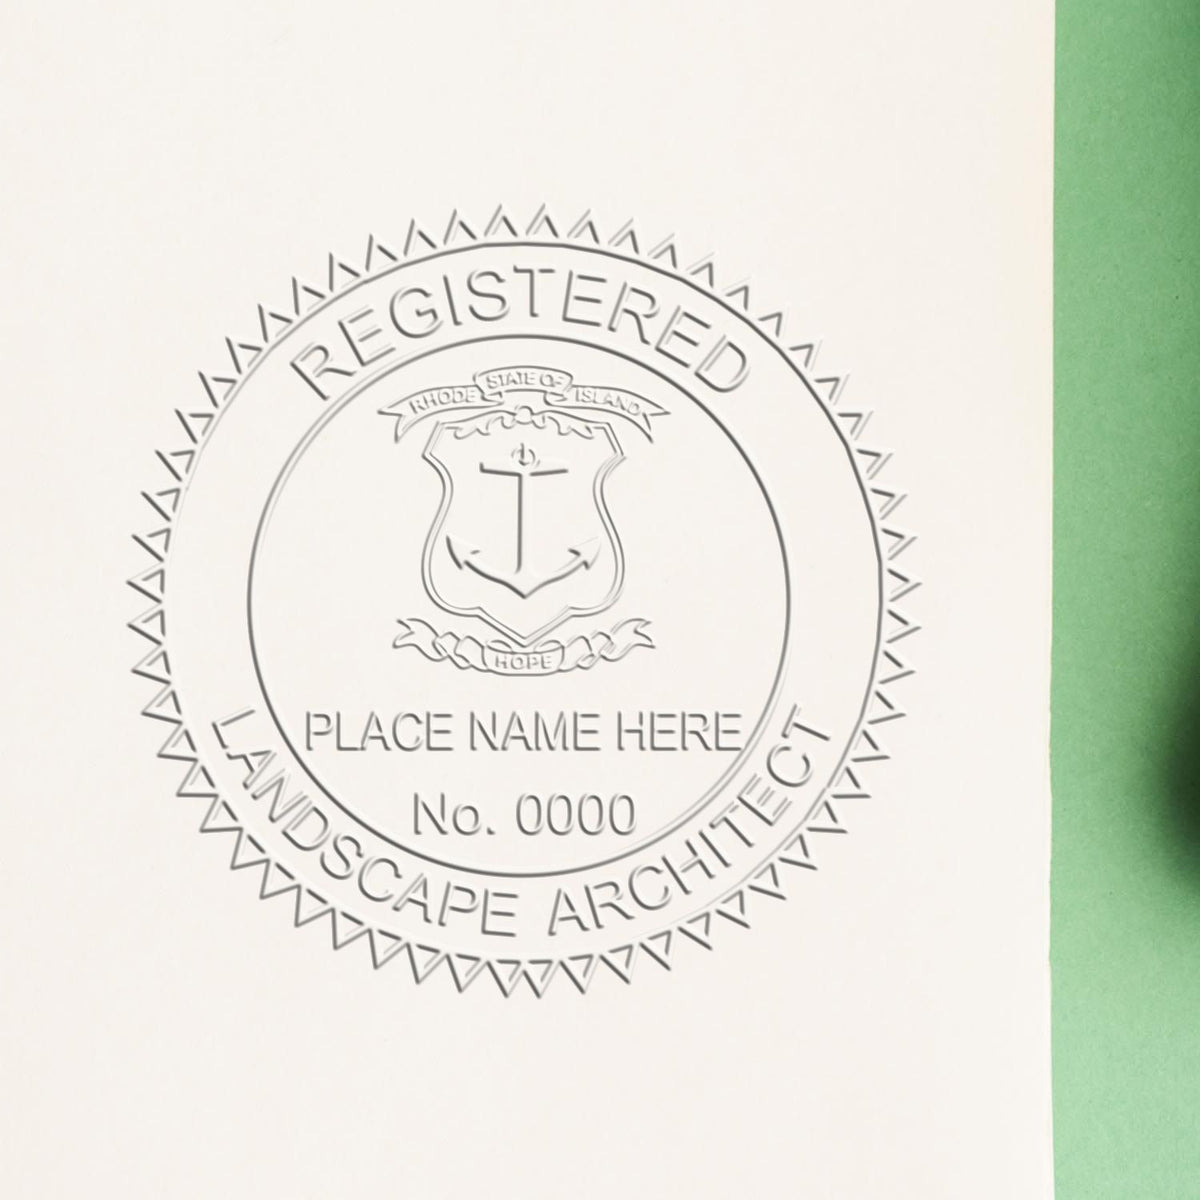 A photograph of the Hybrid Rhode Island Landscape Architect Seal stamp impression reveals a vivid, professional image of the on paper.